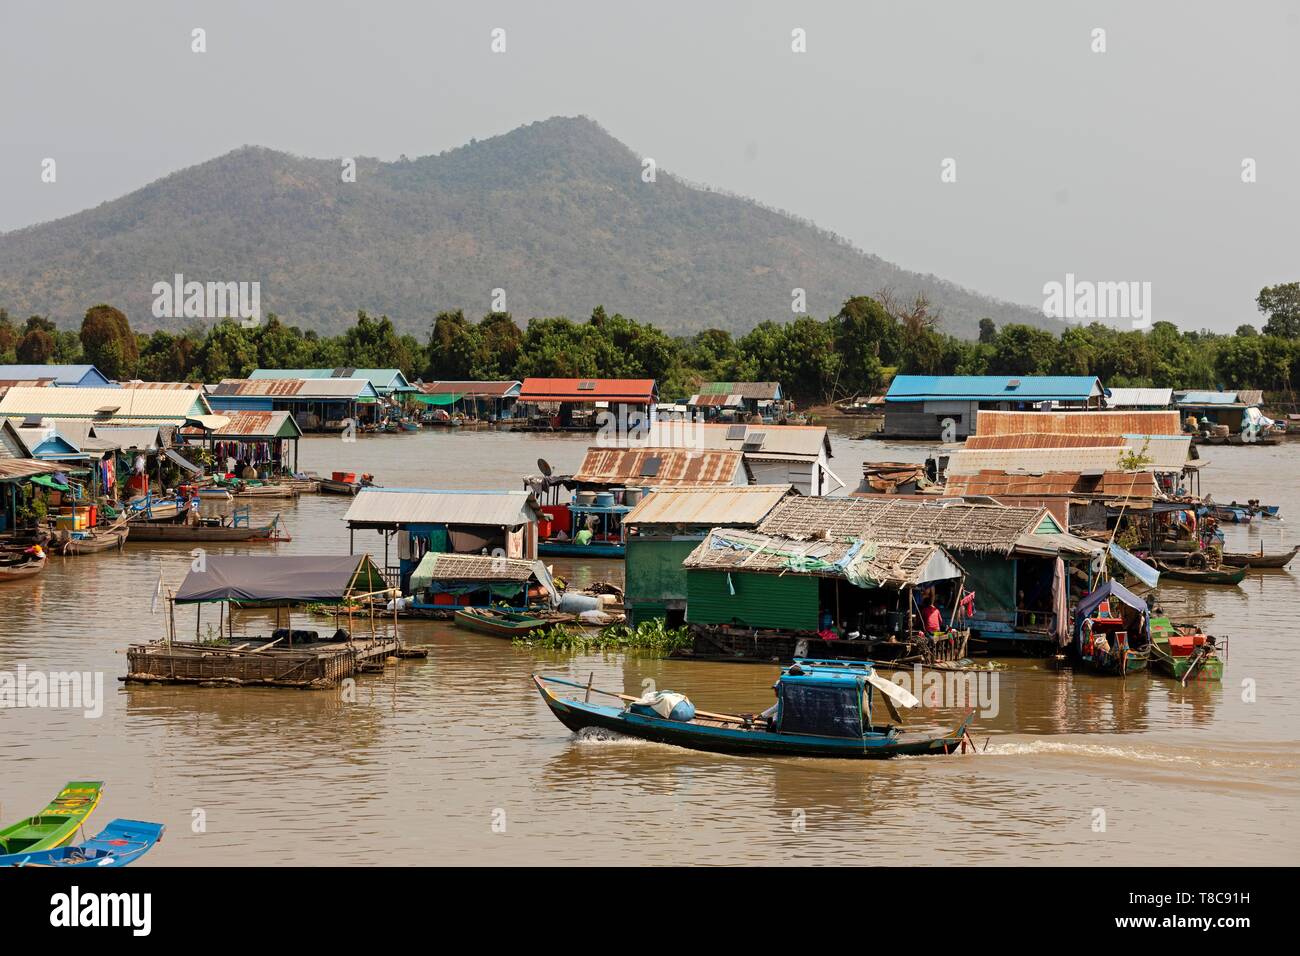 Floating villages with stilt houses, fishing village, boats at the Tonle Sap river, Kampong Chhnang, Cambodia Stock Photo